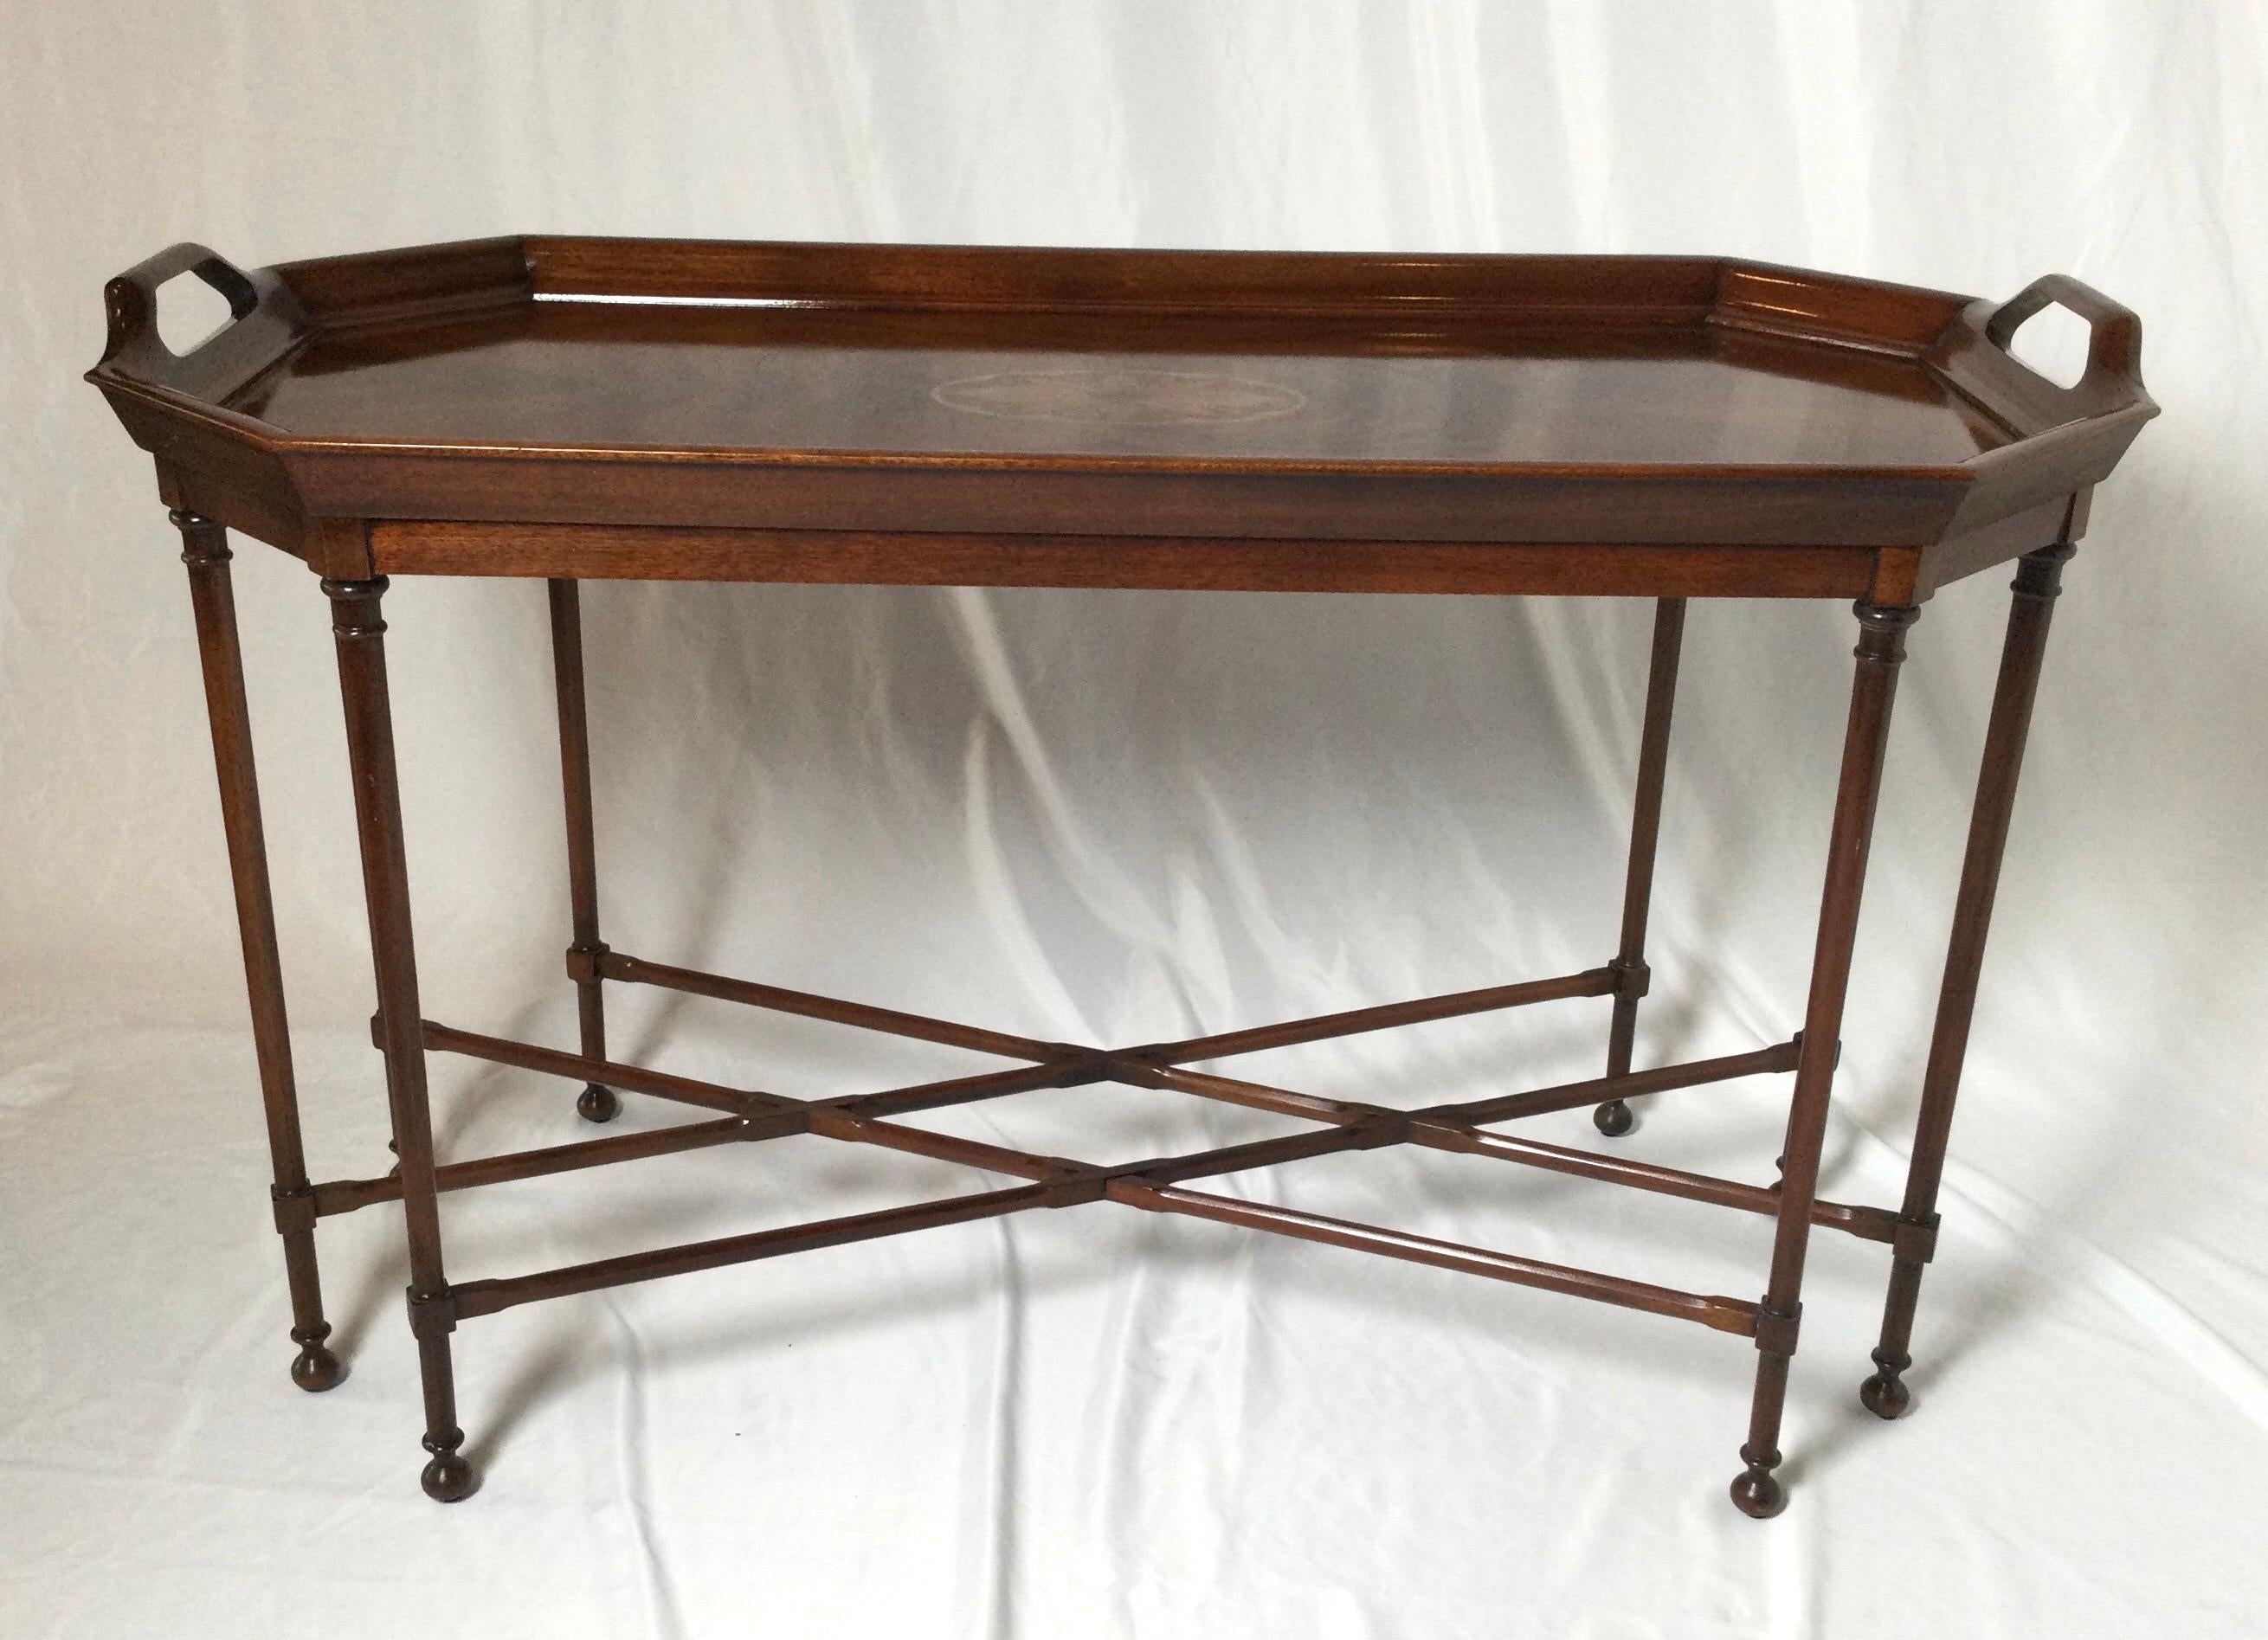 Edwardian Flame Mahogany Inlaid Cocktail Table by Councill